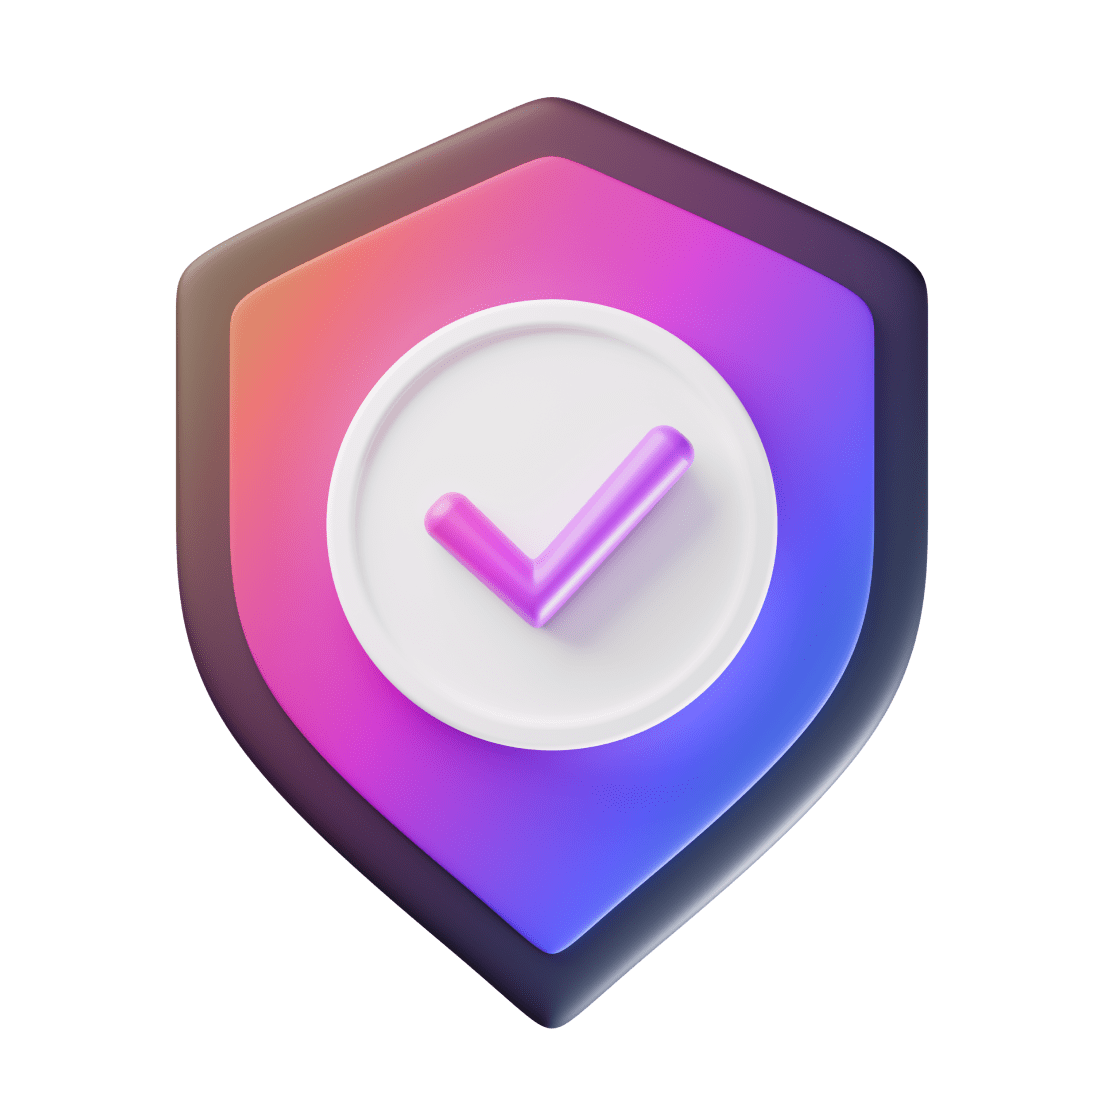 3D digital graphic of a shield-like shape with a pink-to-blue gradient in the background a checkmark in the center.